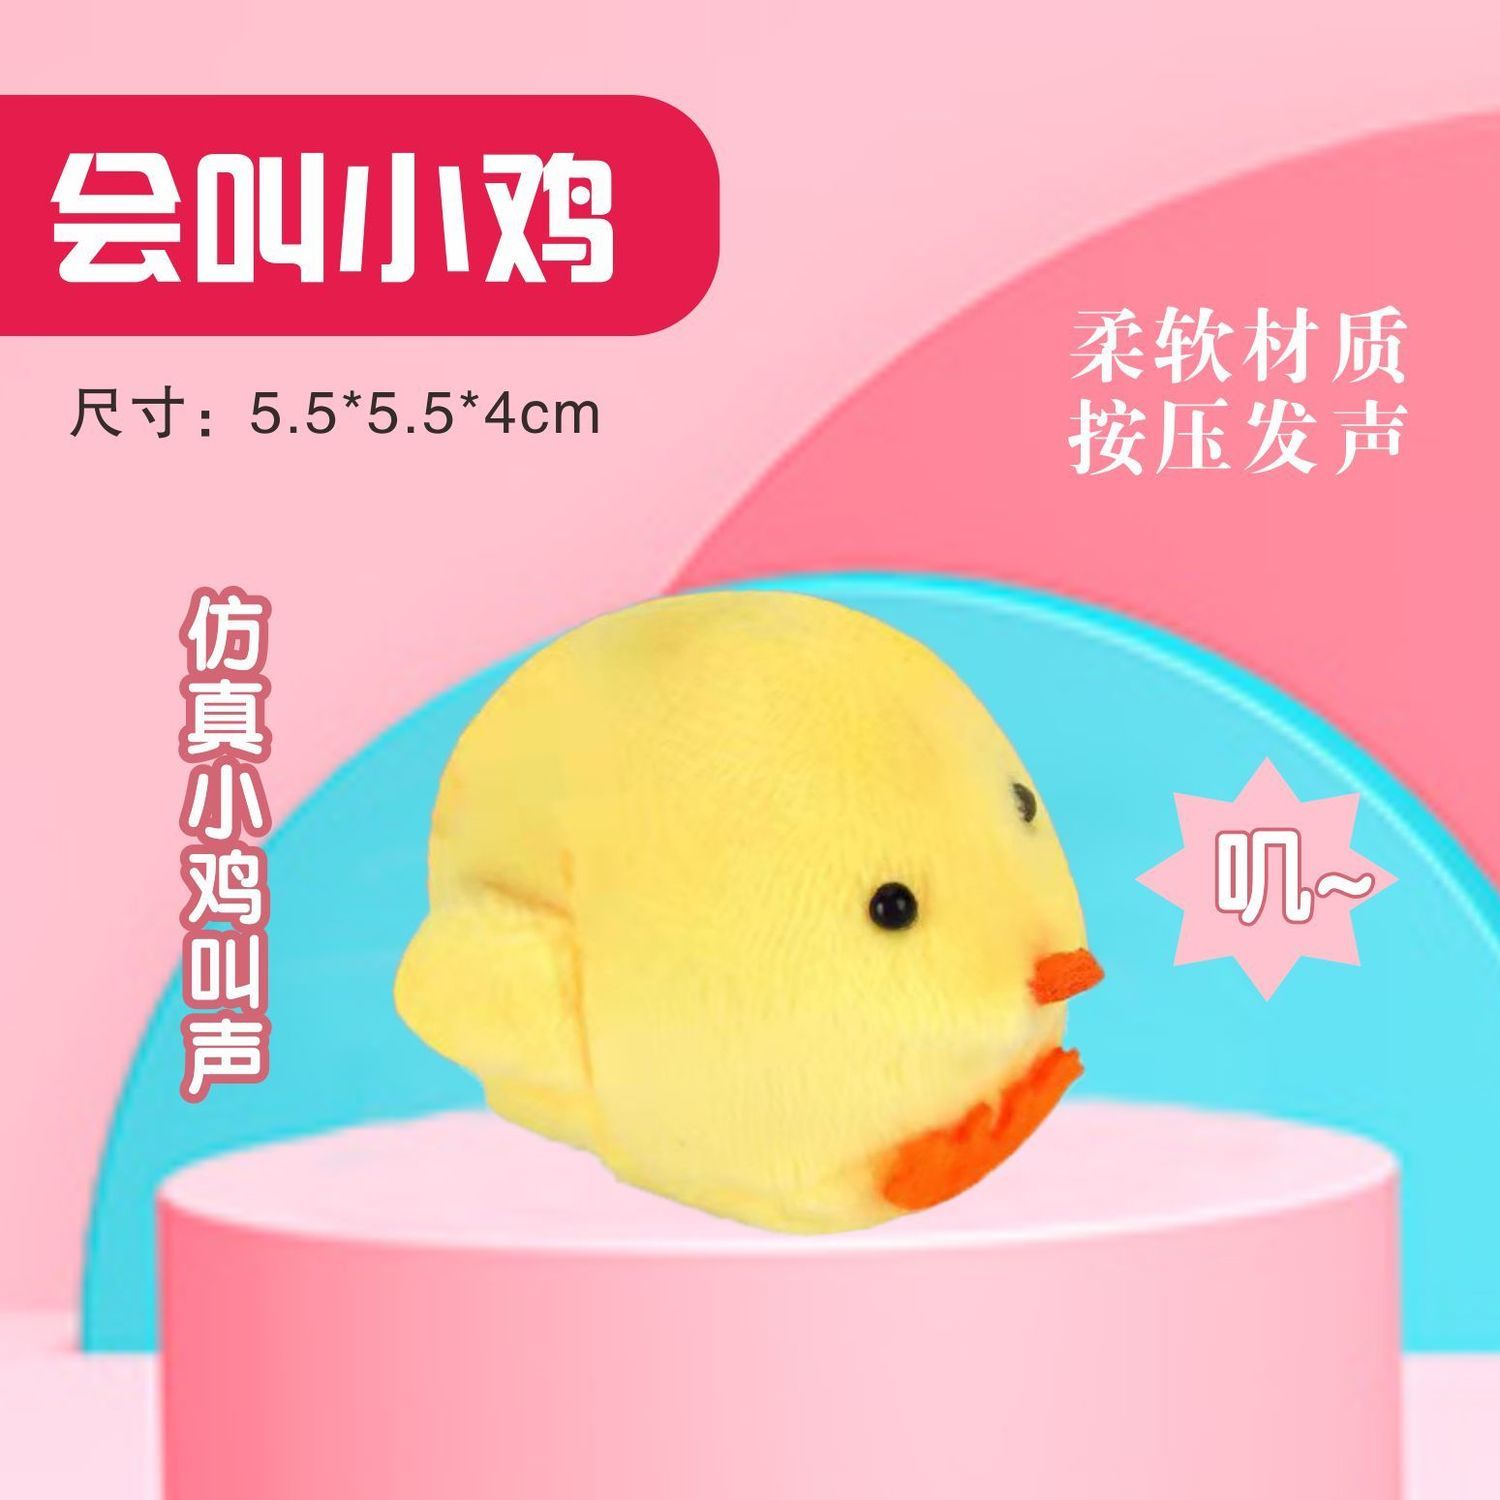 Cute Chicken Developing House Pet Toy Will Call Chicken Raising Bunny Girl Play House Learning Talking Penguin Pet